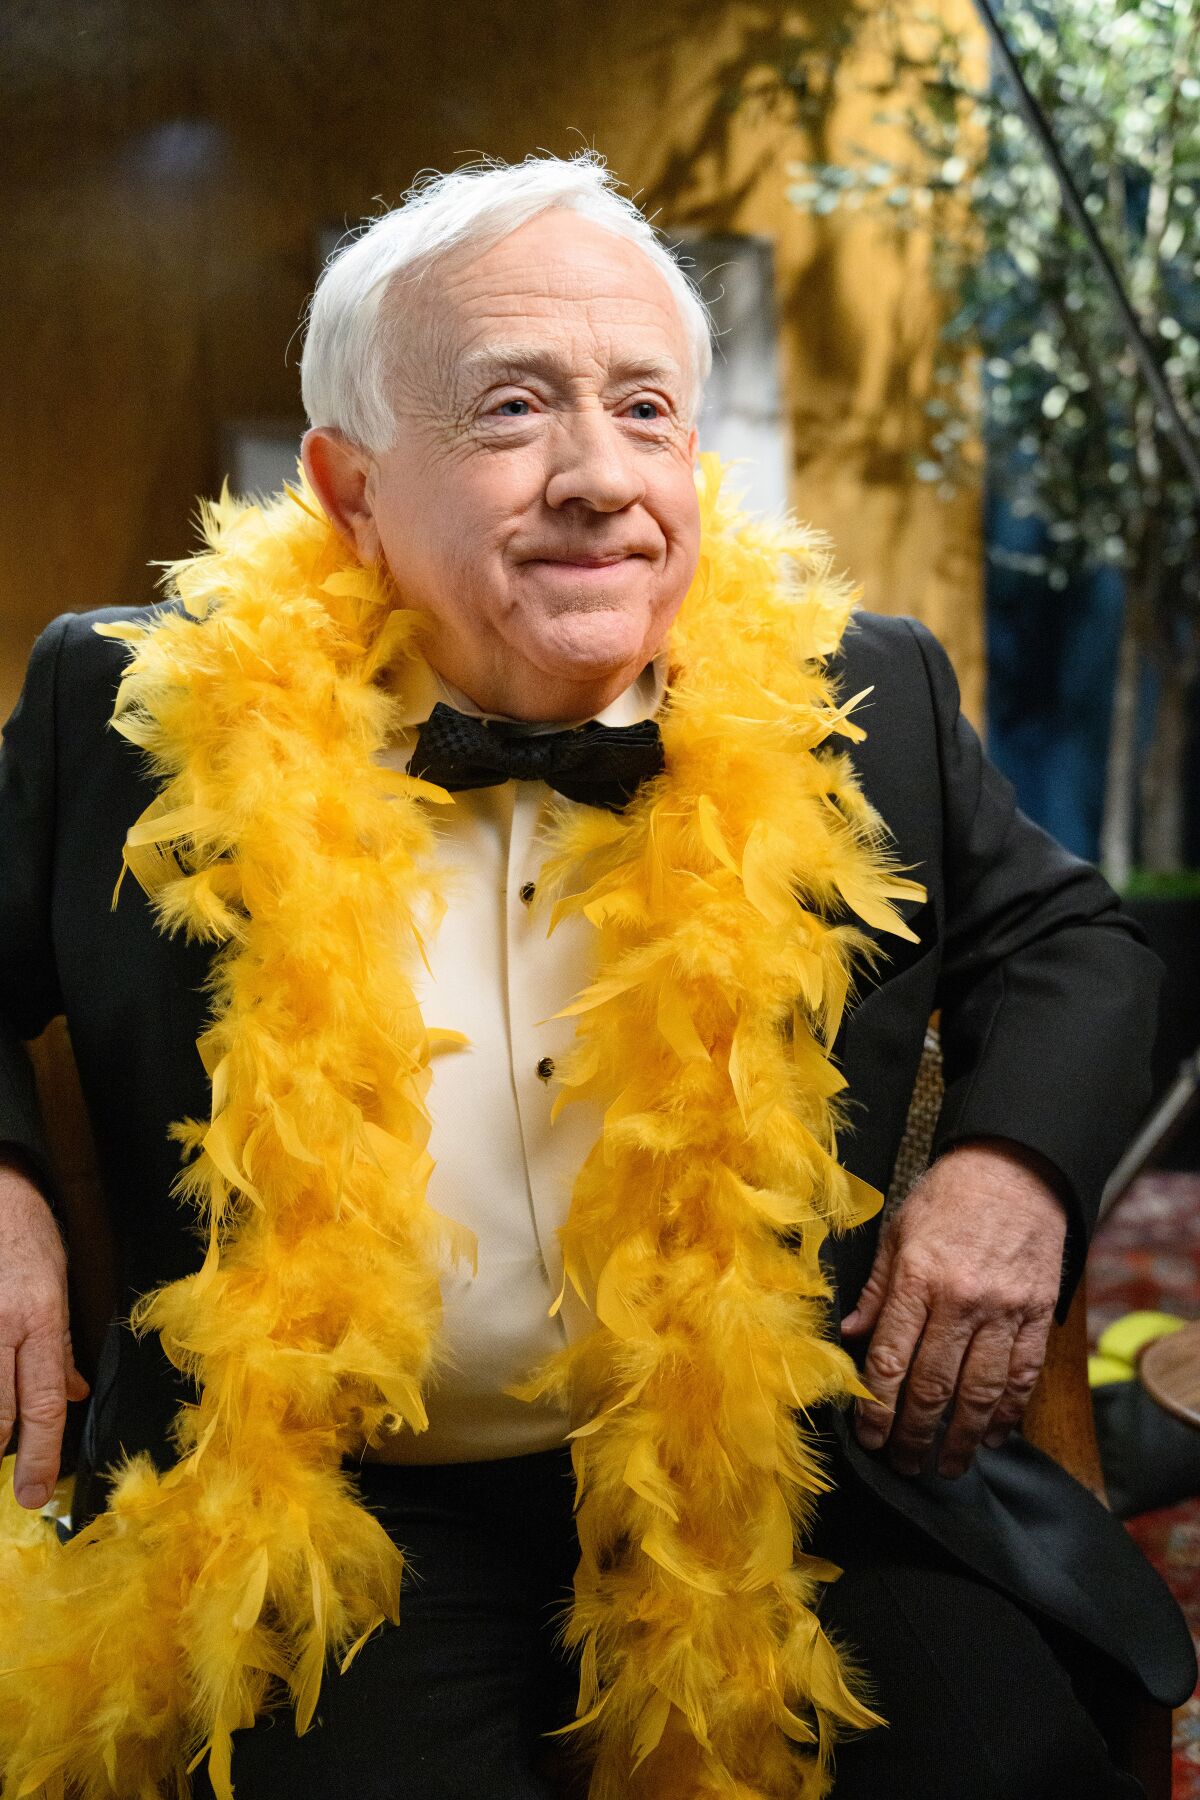 An older man in a tux and a yellow boa.